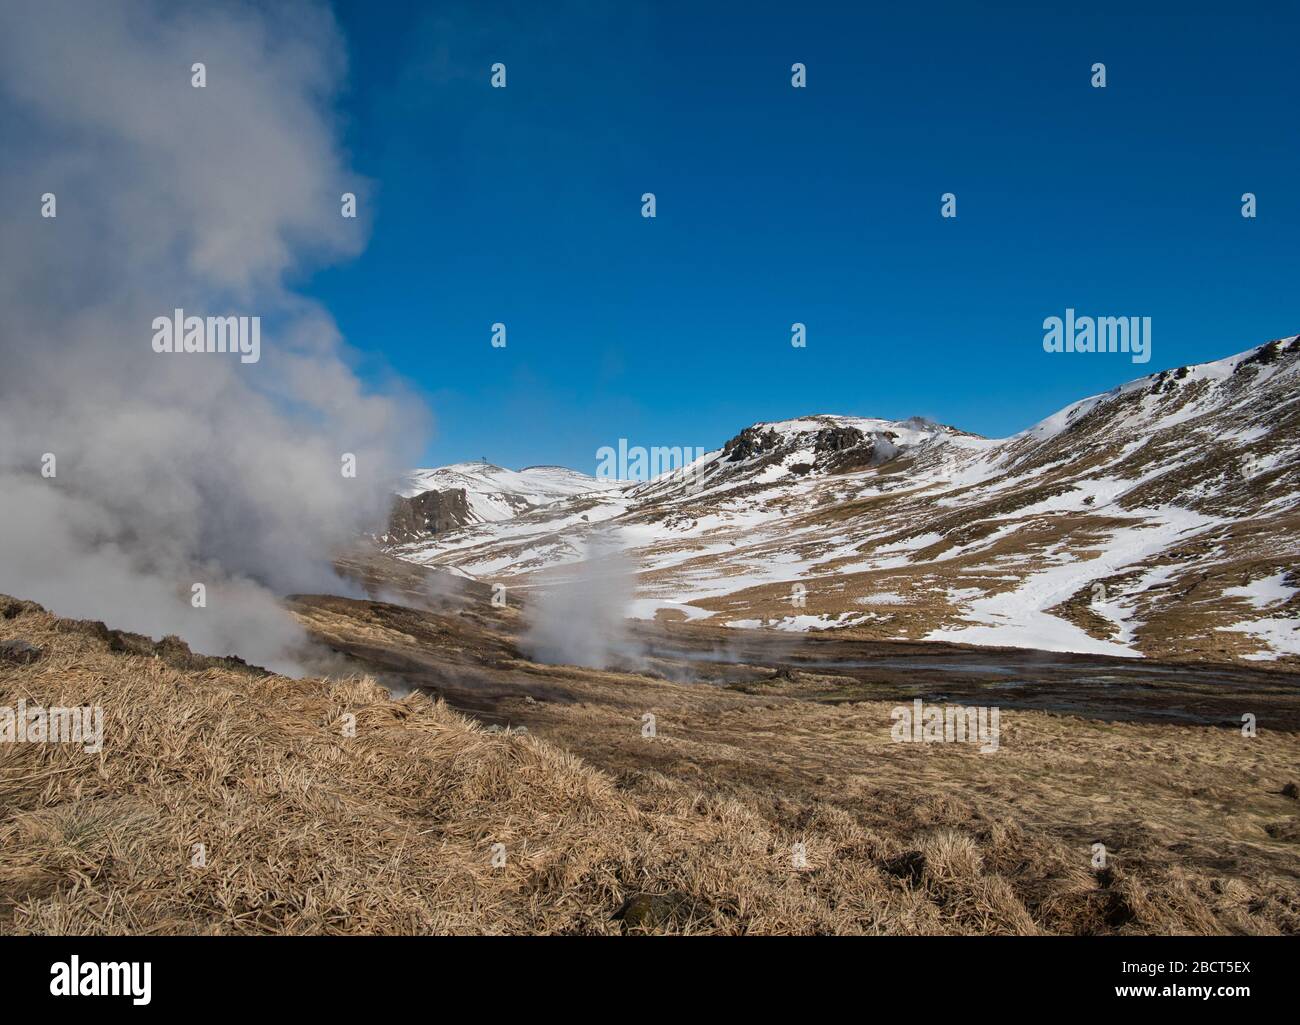 The rising steam from geothermal sources in Iceland near Reykjadalur Stock Photo